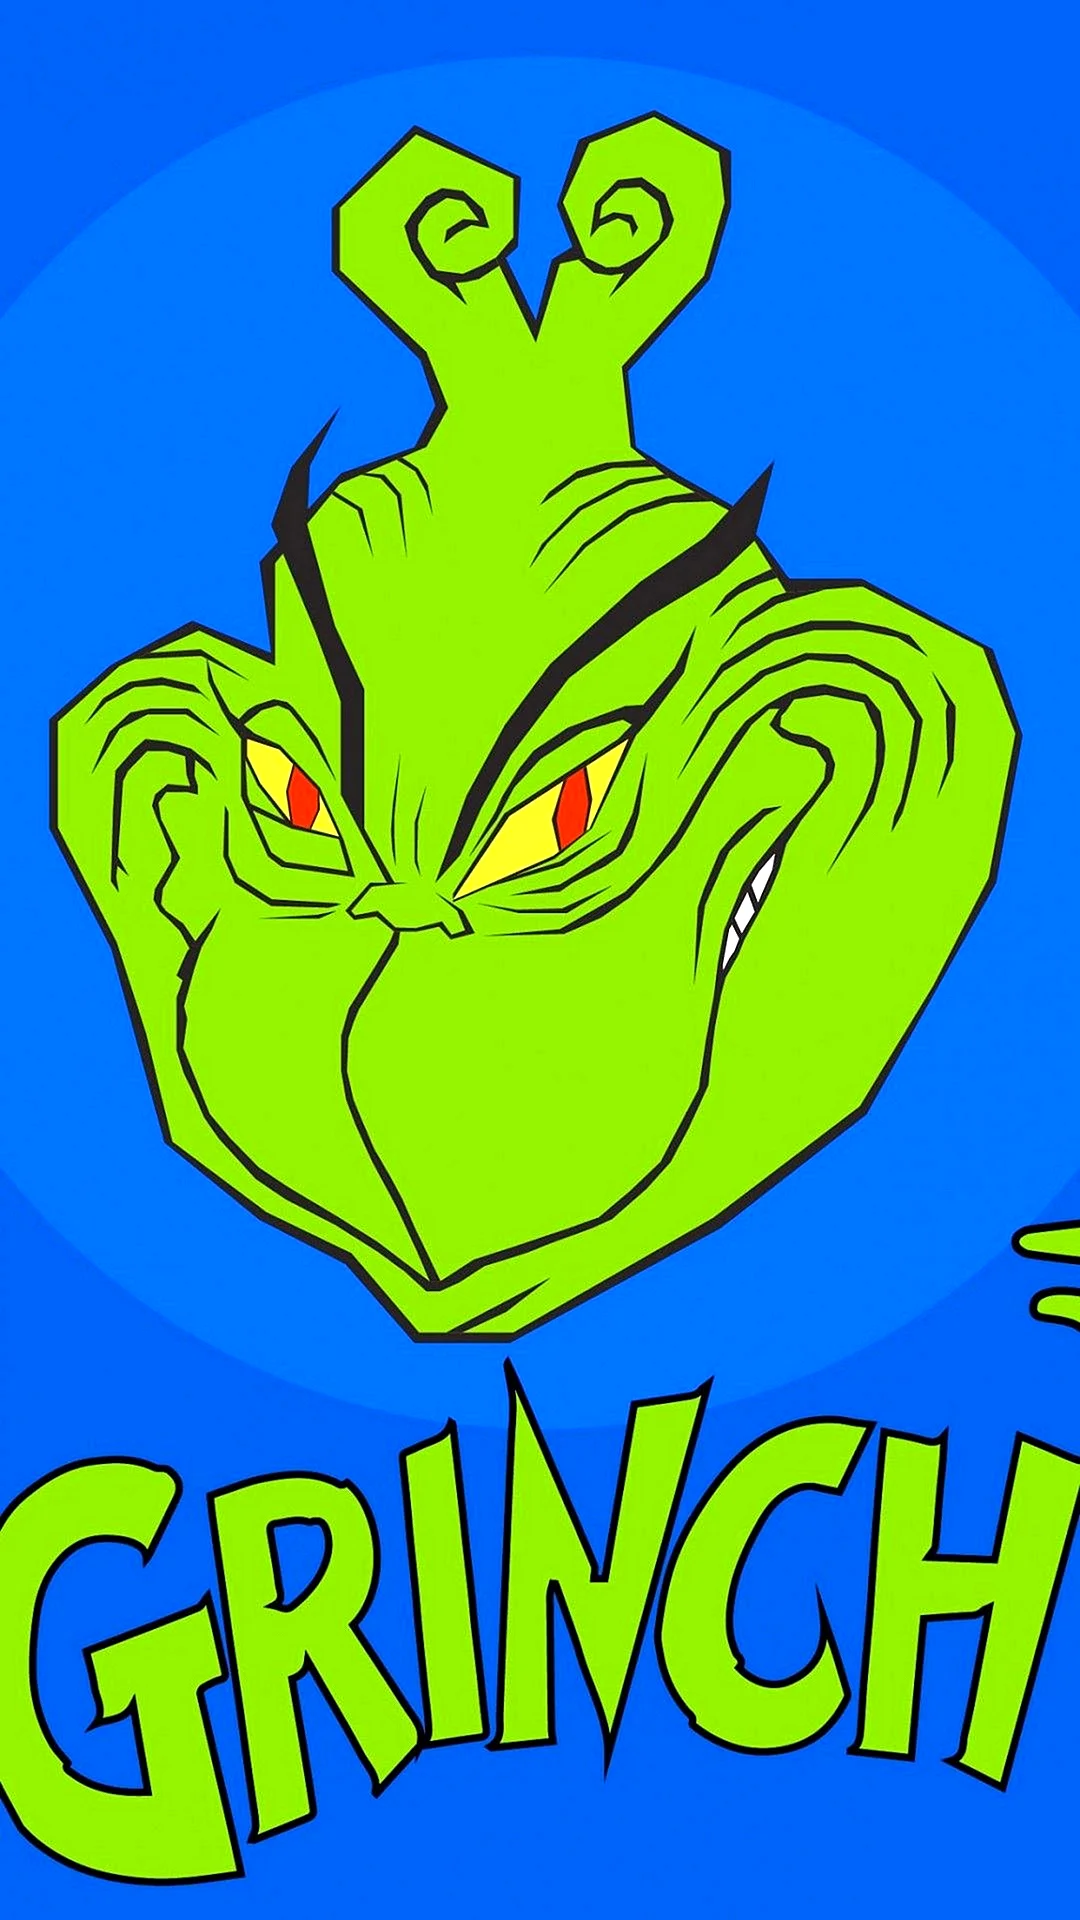 The Green Grinch Wallpaper For iPhone